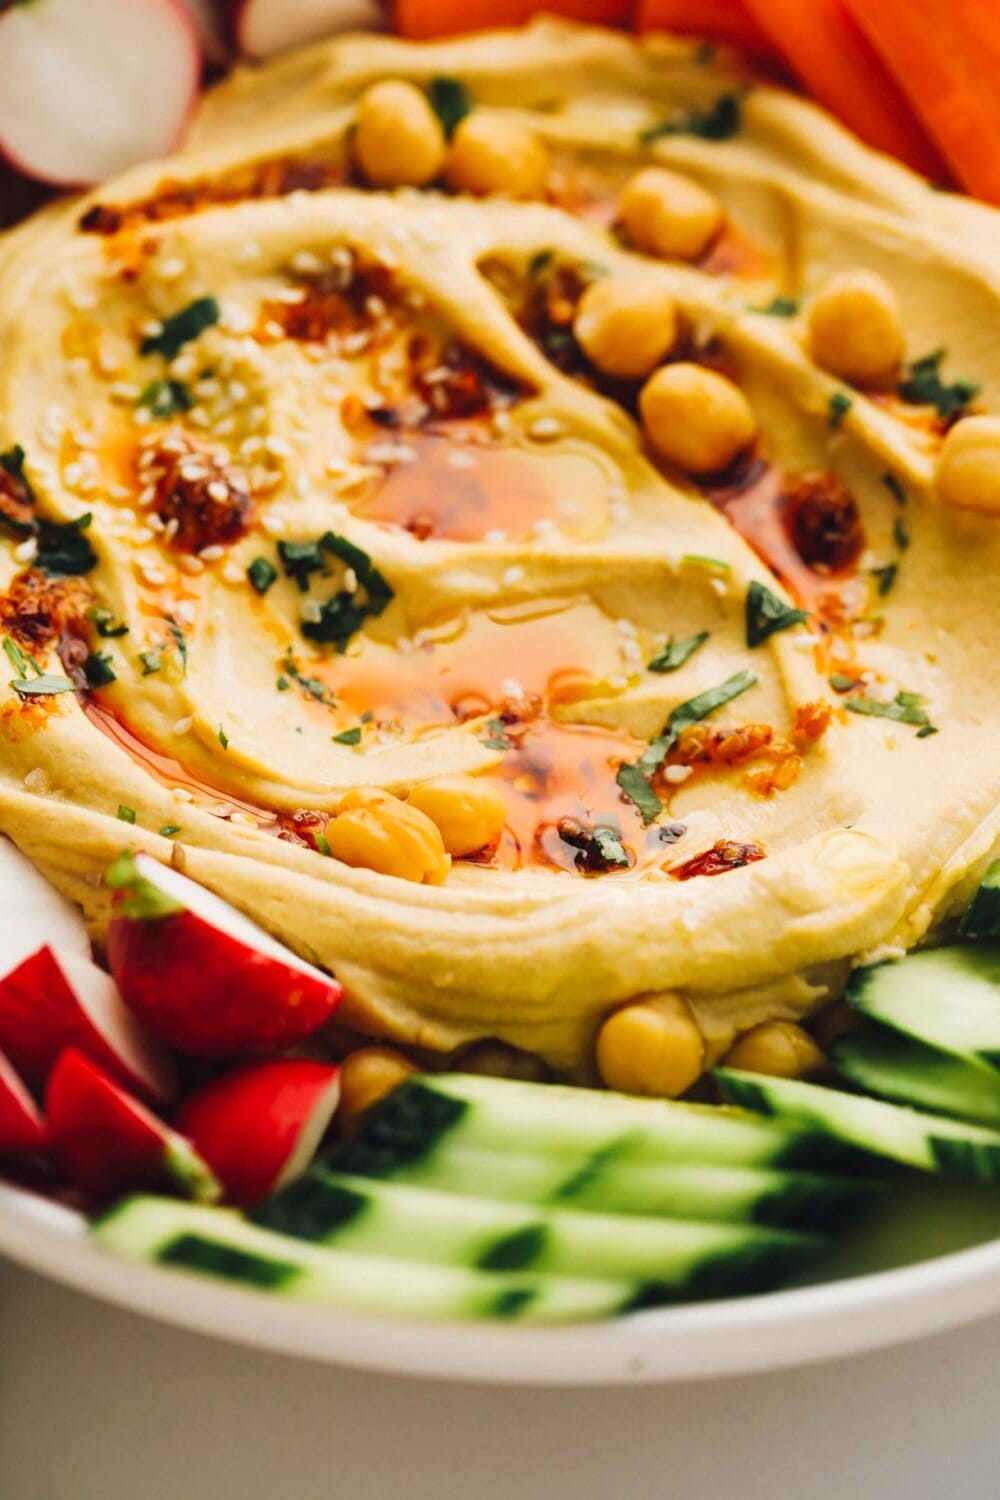 hummus on a platter with vegetables